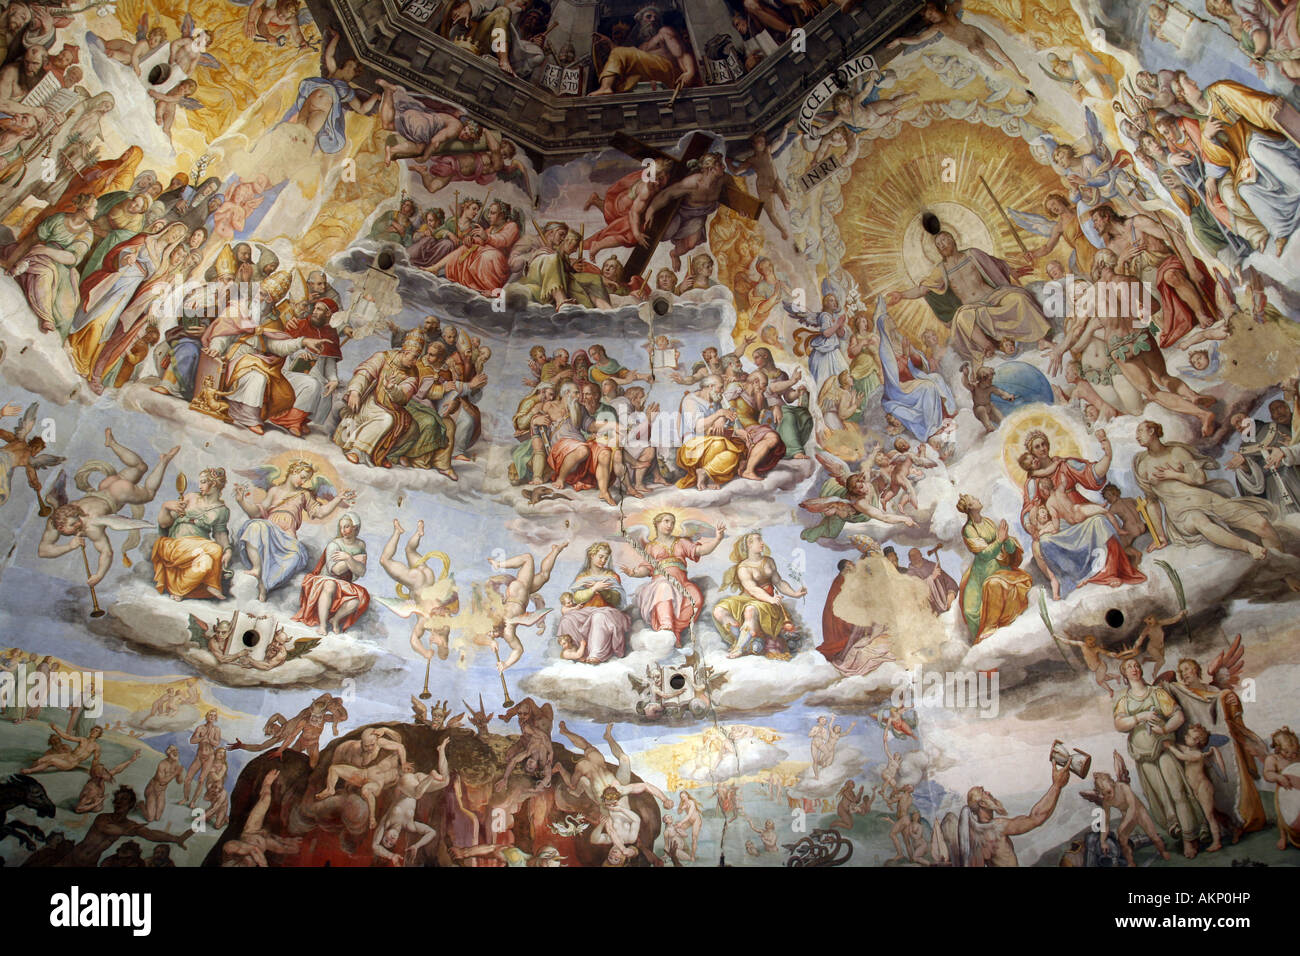 The Last Judgement Painting On The Ceiling Of The Dome The